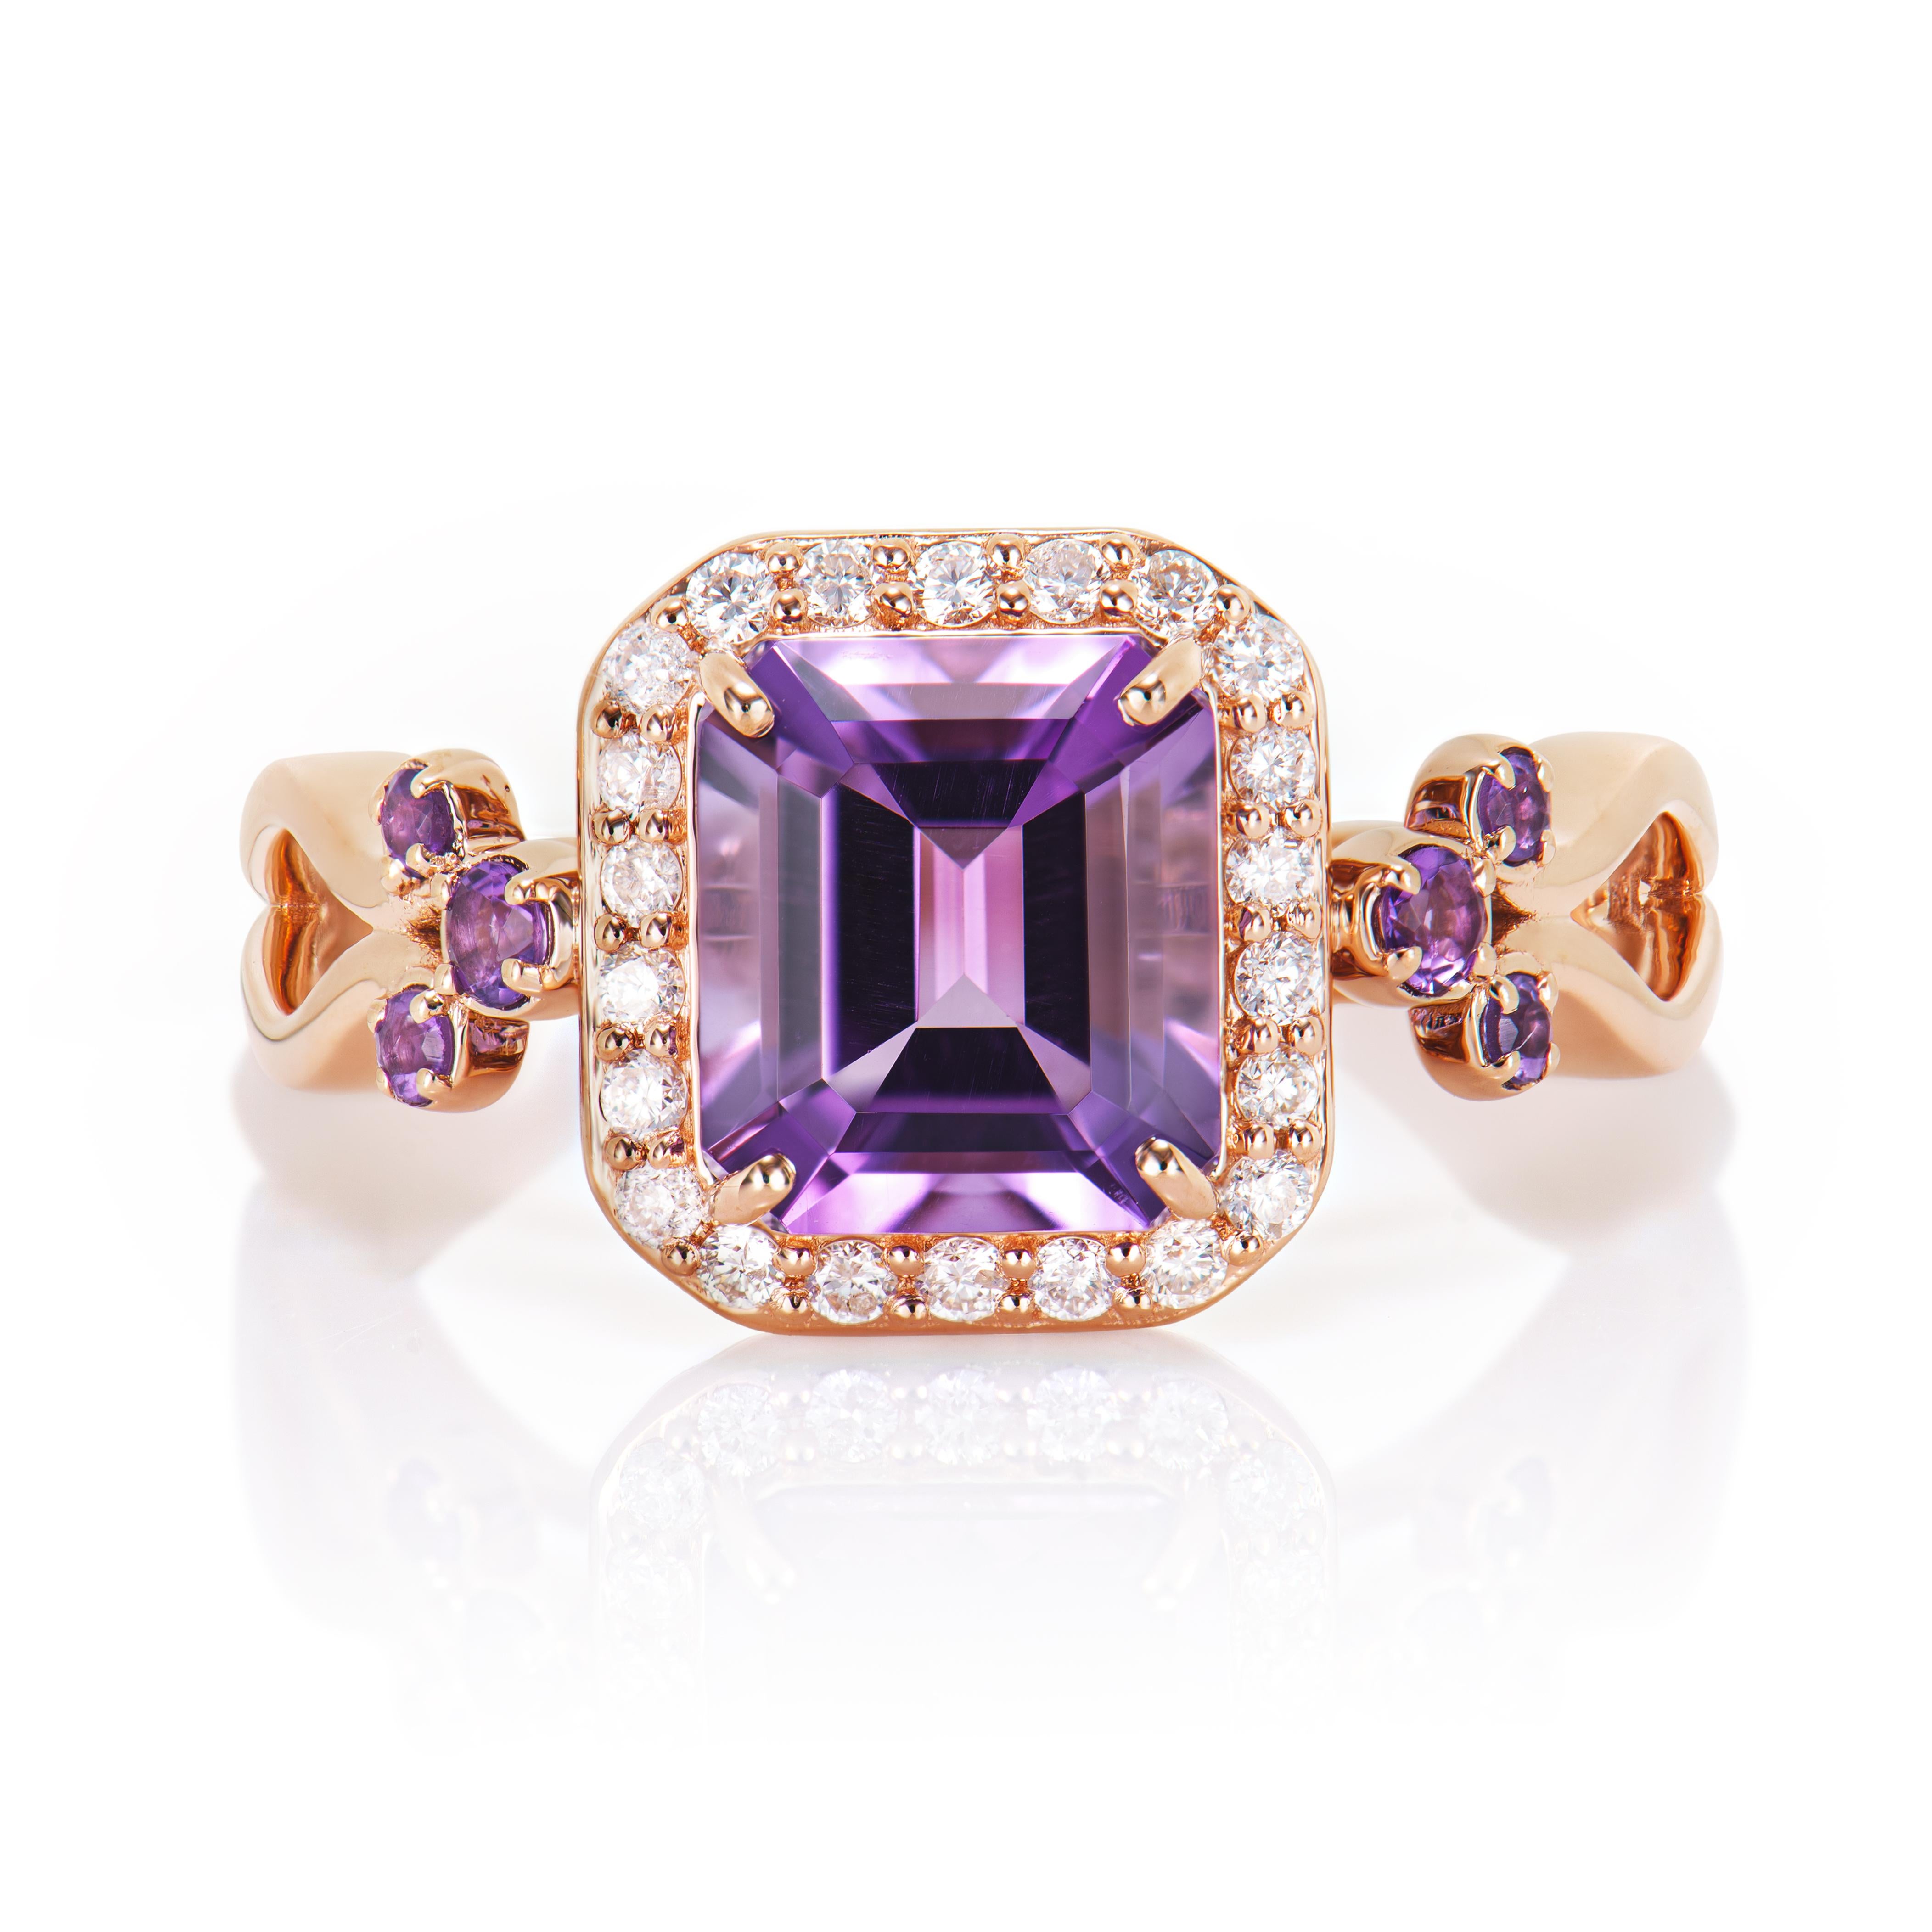 Contemporary 1.78 Carat Amethyst Fancy Ring in 14Karat Rose Gold with White Diamond.   For Sale